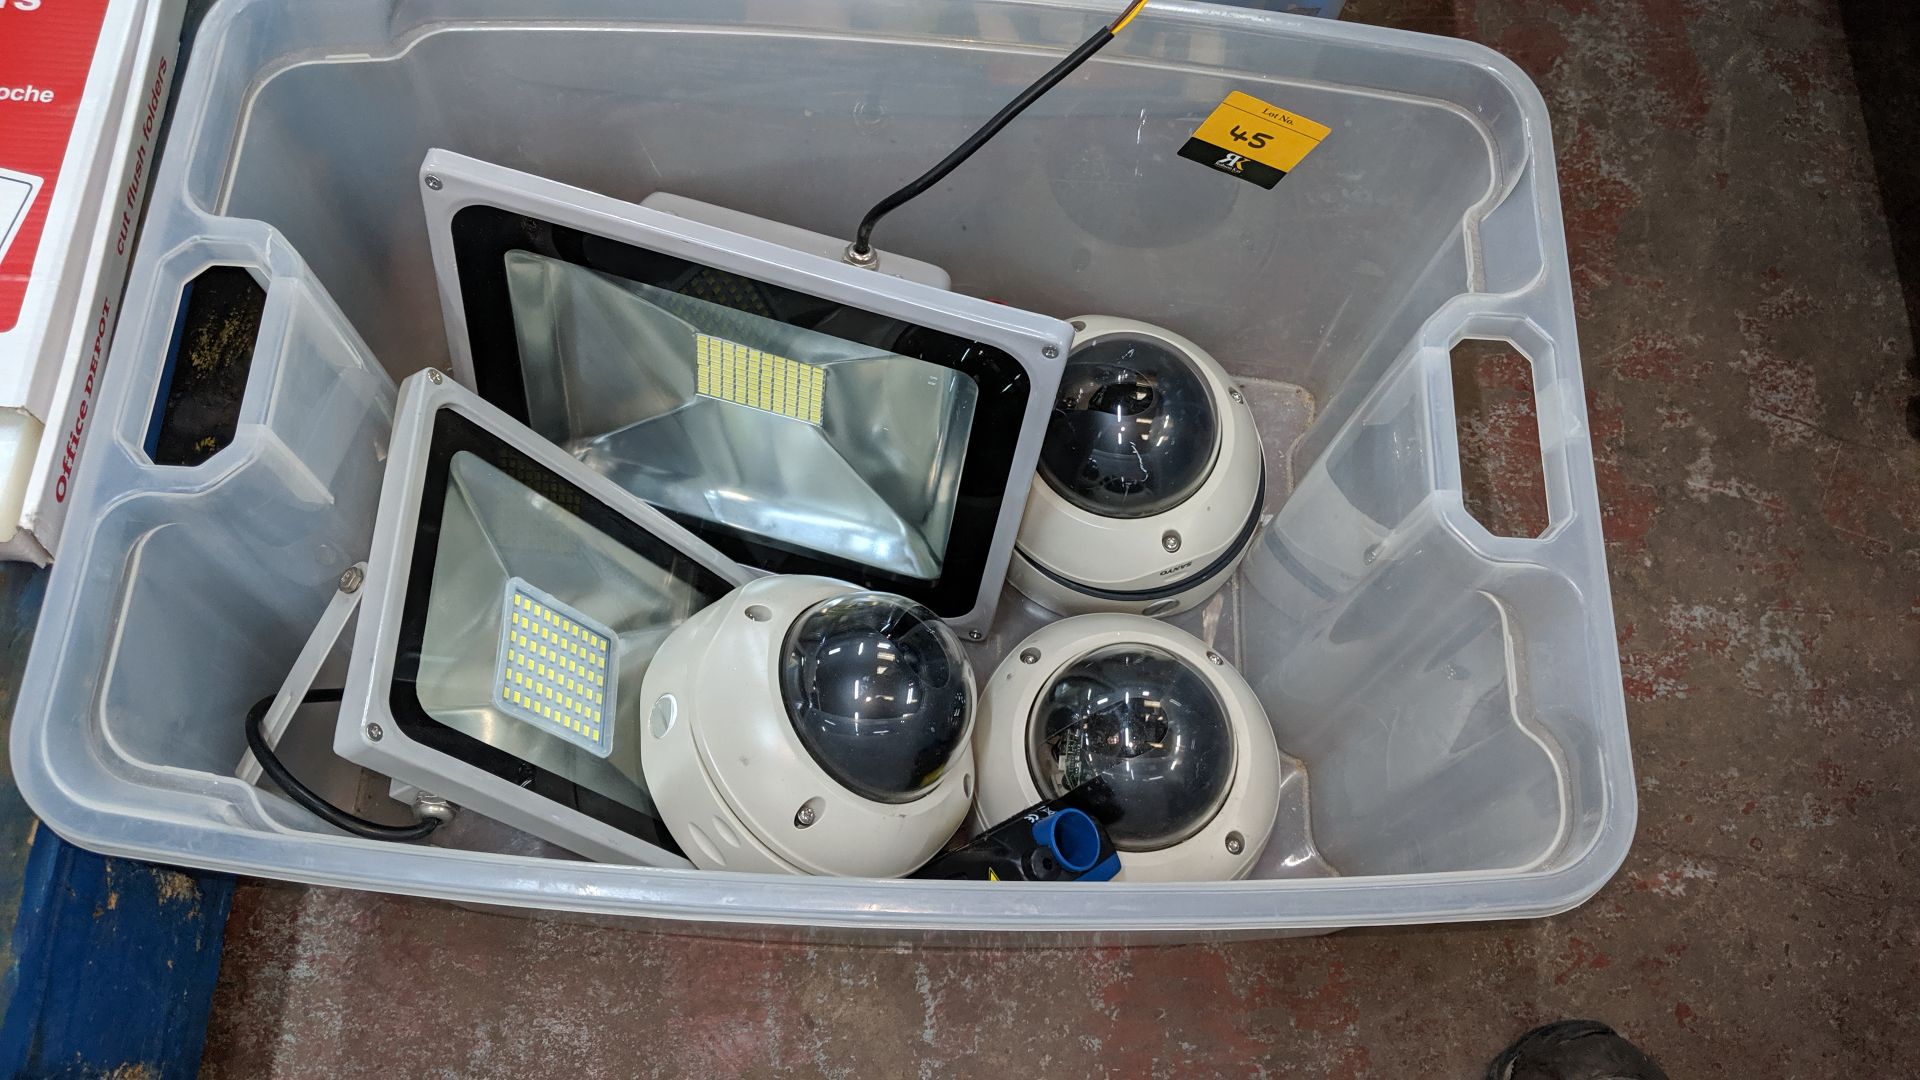 Quantity of CCTV domes, LED lighting & Draper laser measure - crate excluded. This is one of a